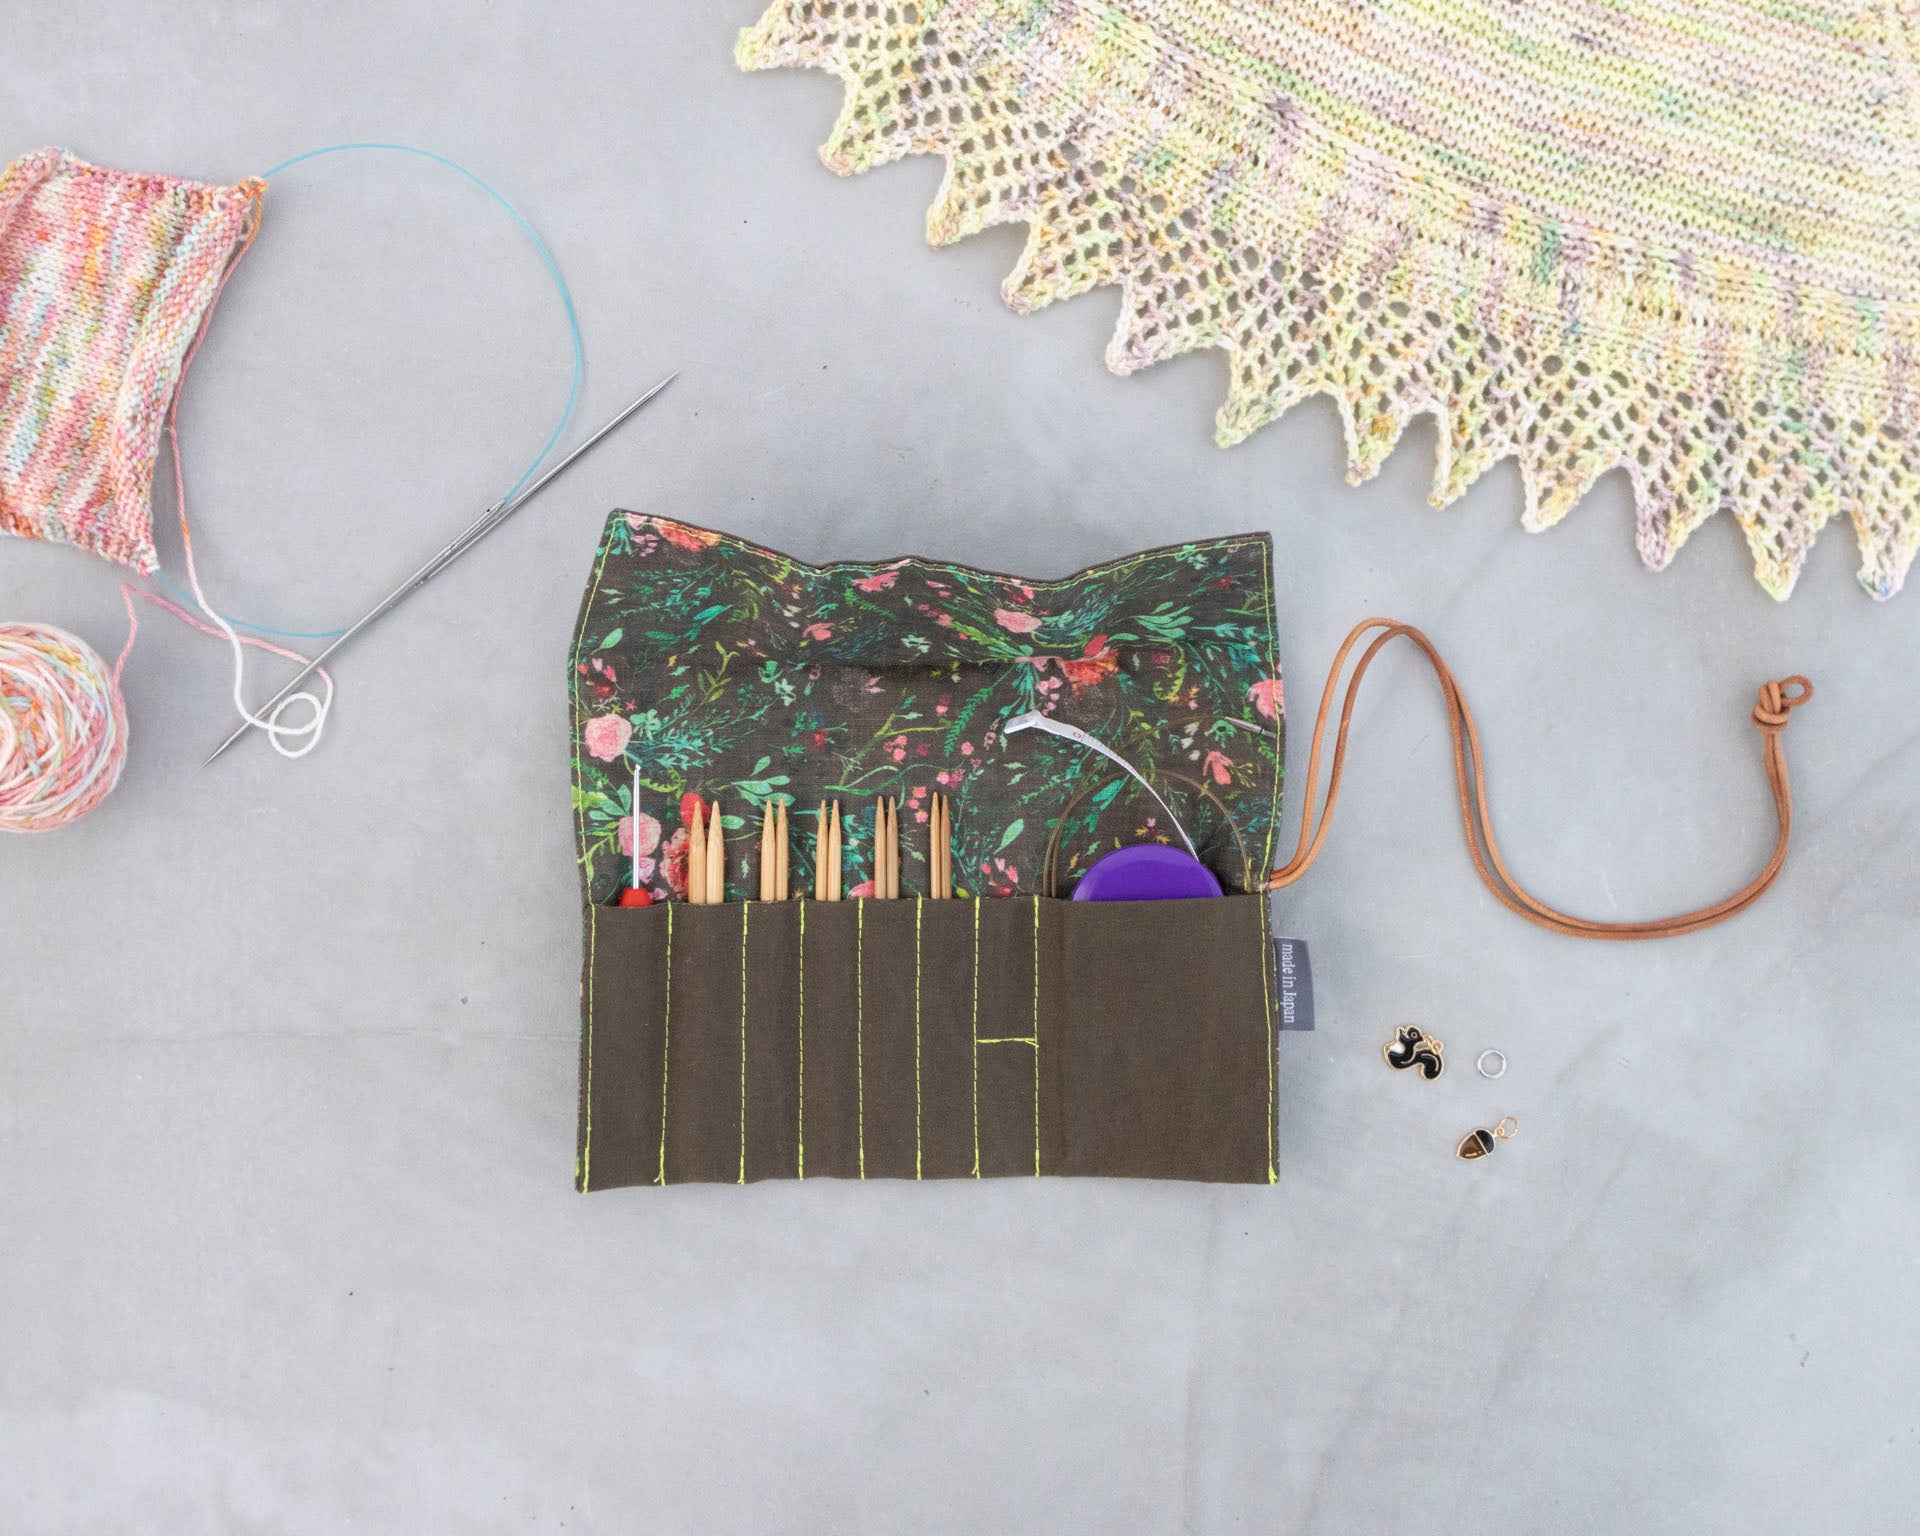 【sewing kit】1 Project Needle Case キット